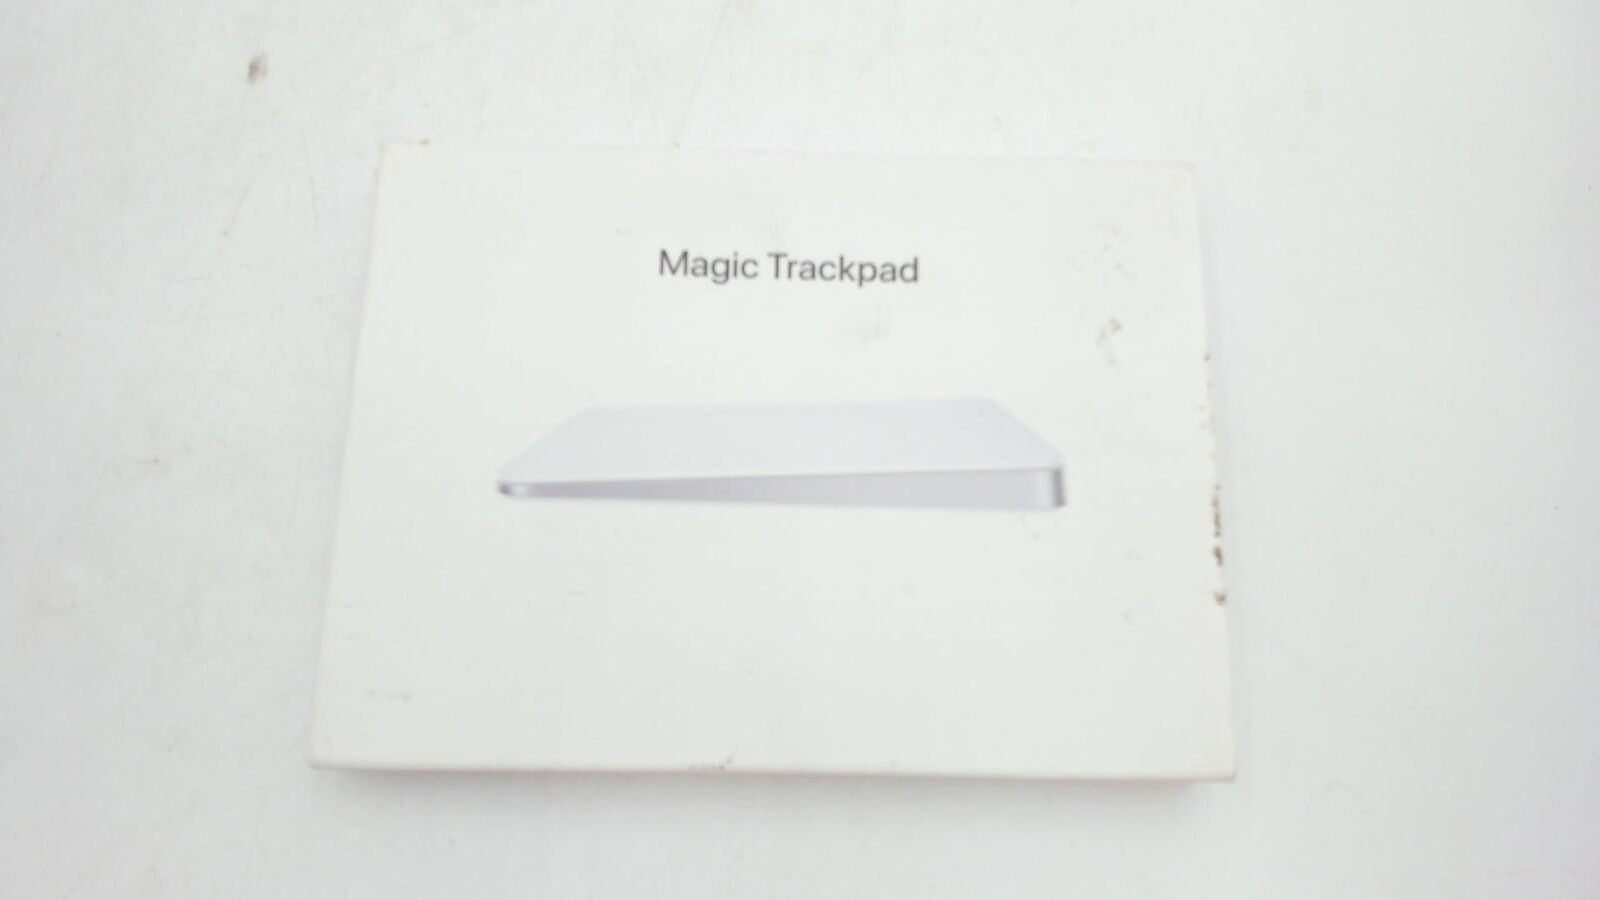 AUTHENTIC Apple Magic Trackpad: Wireless, Bluetooth,SN: scc2247301xe0flwad